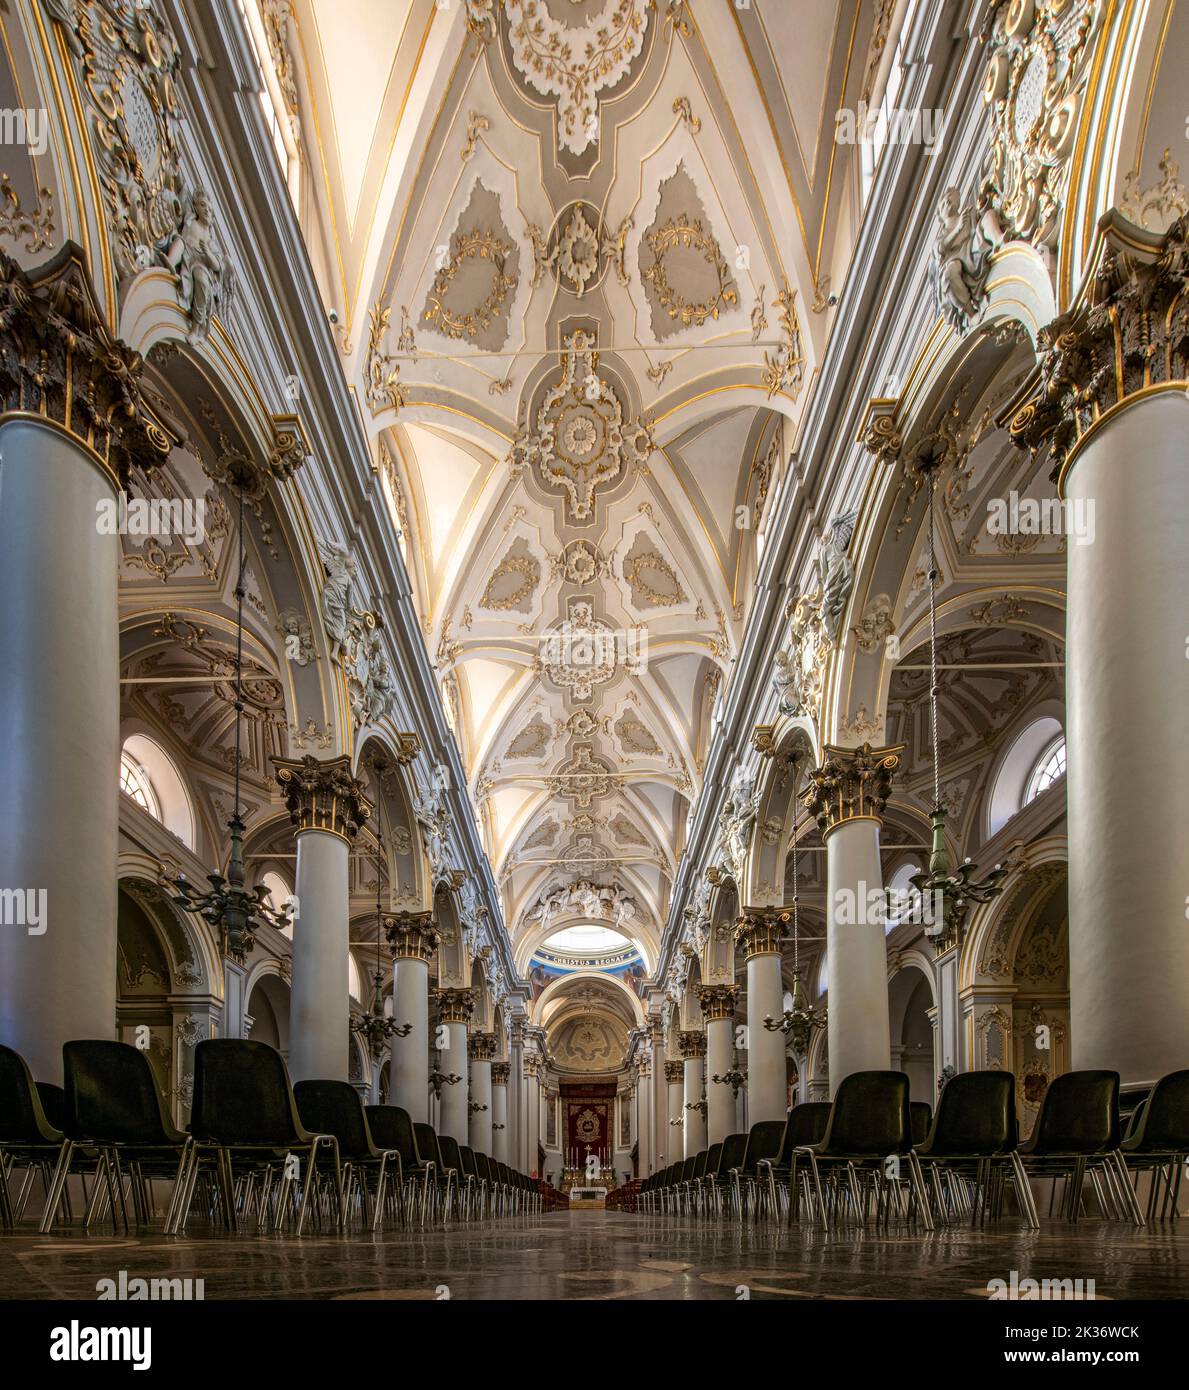 The intreior of Baroque interior of the 18th century Ragusa Cathedral in Ragusa Superiore, Sicily, Italy Stock Photo